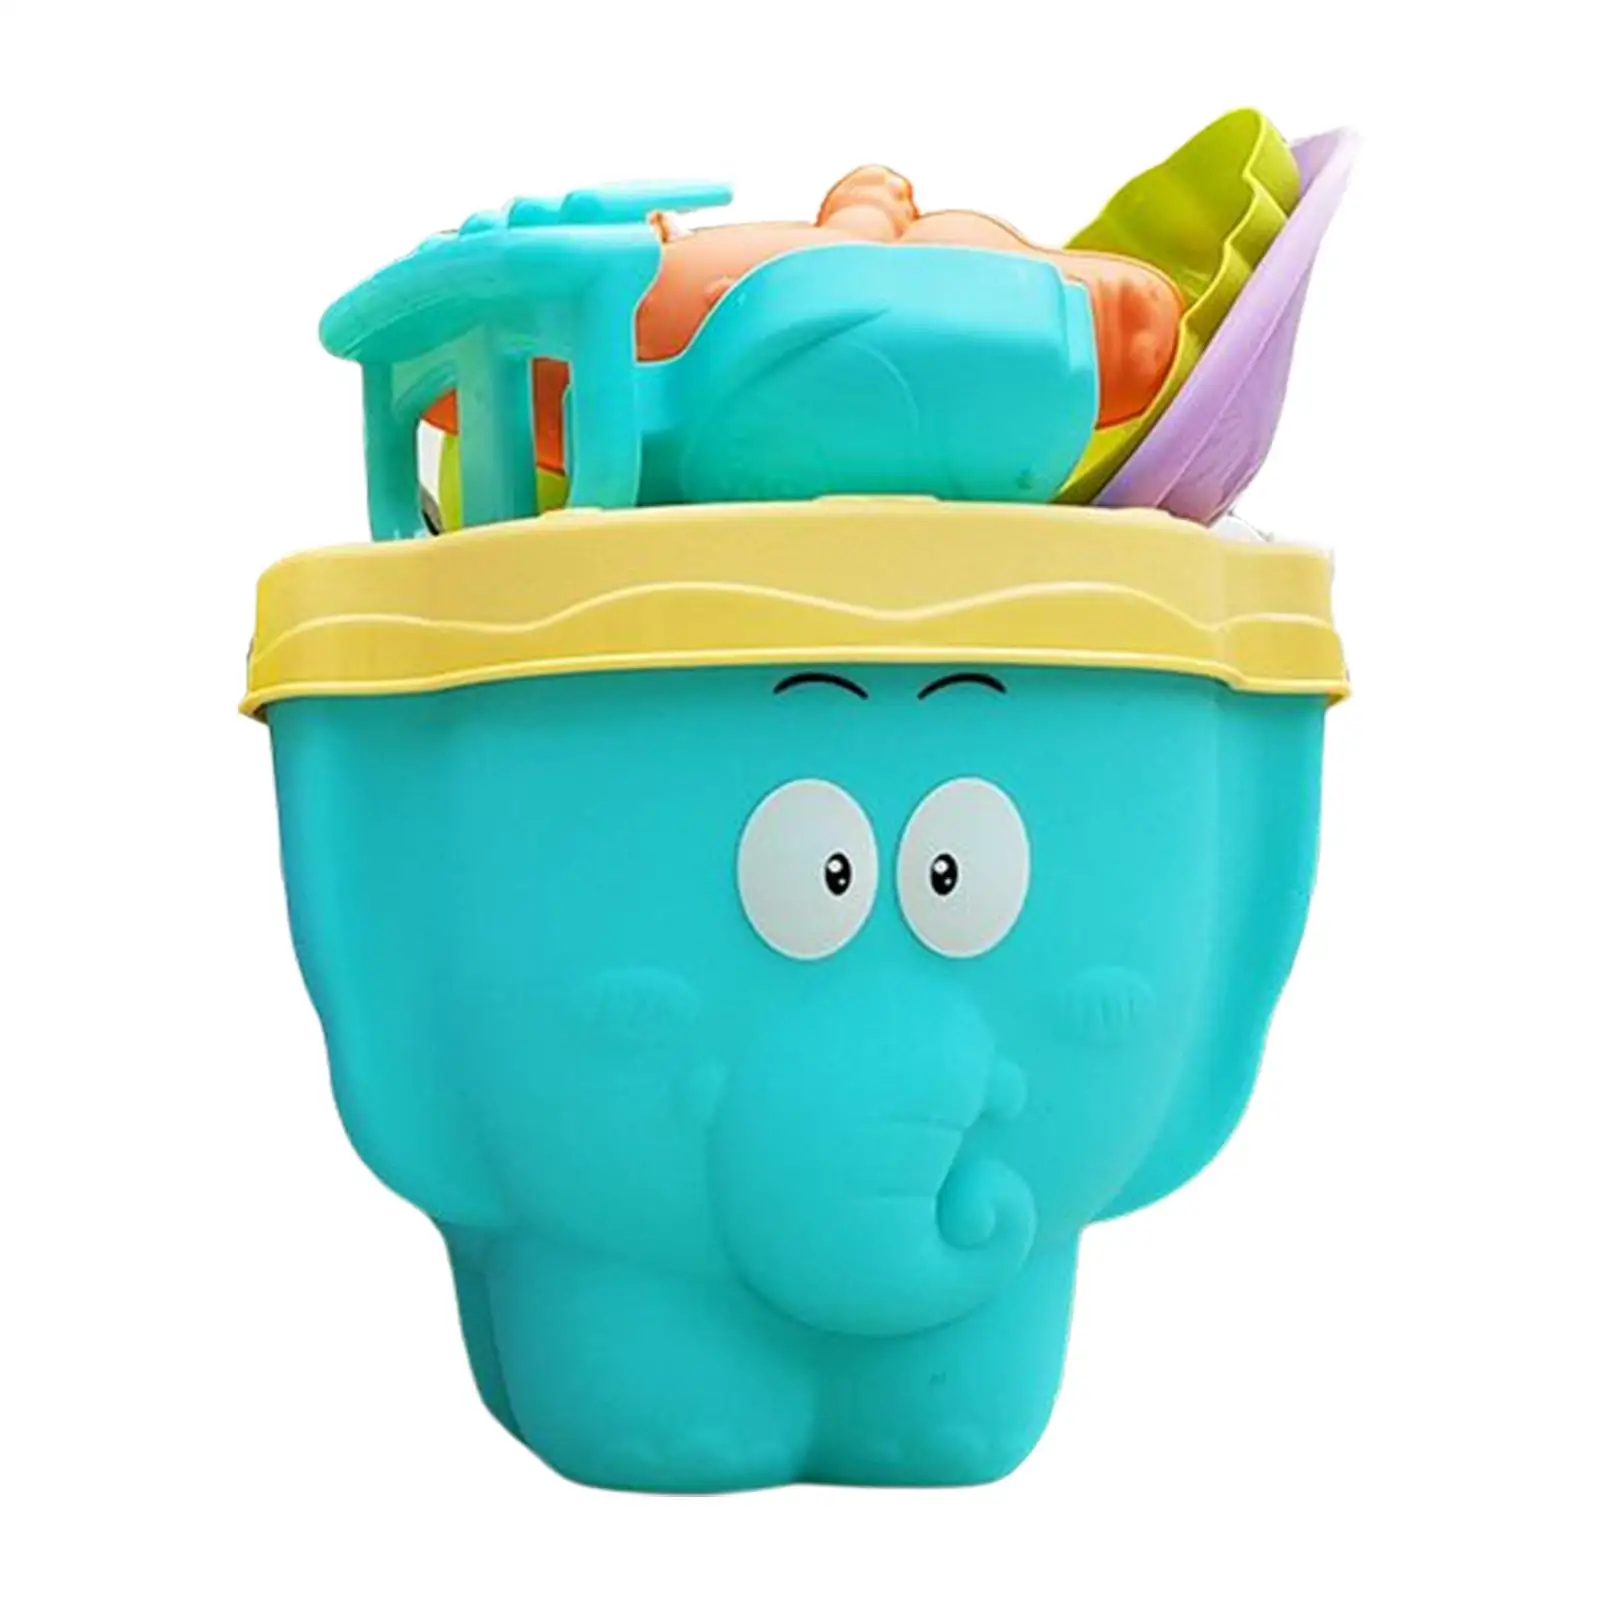 Children`s Beach Toy Set  Toy Bucket 11 Pieces for Toddlers,